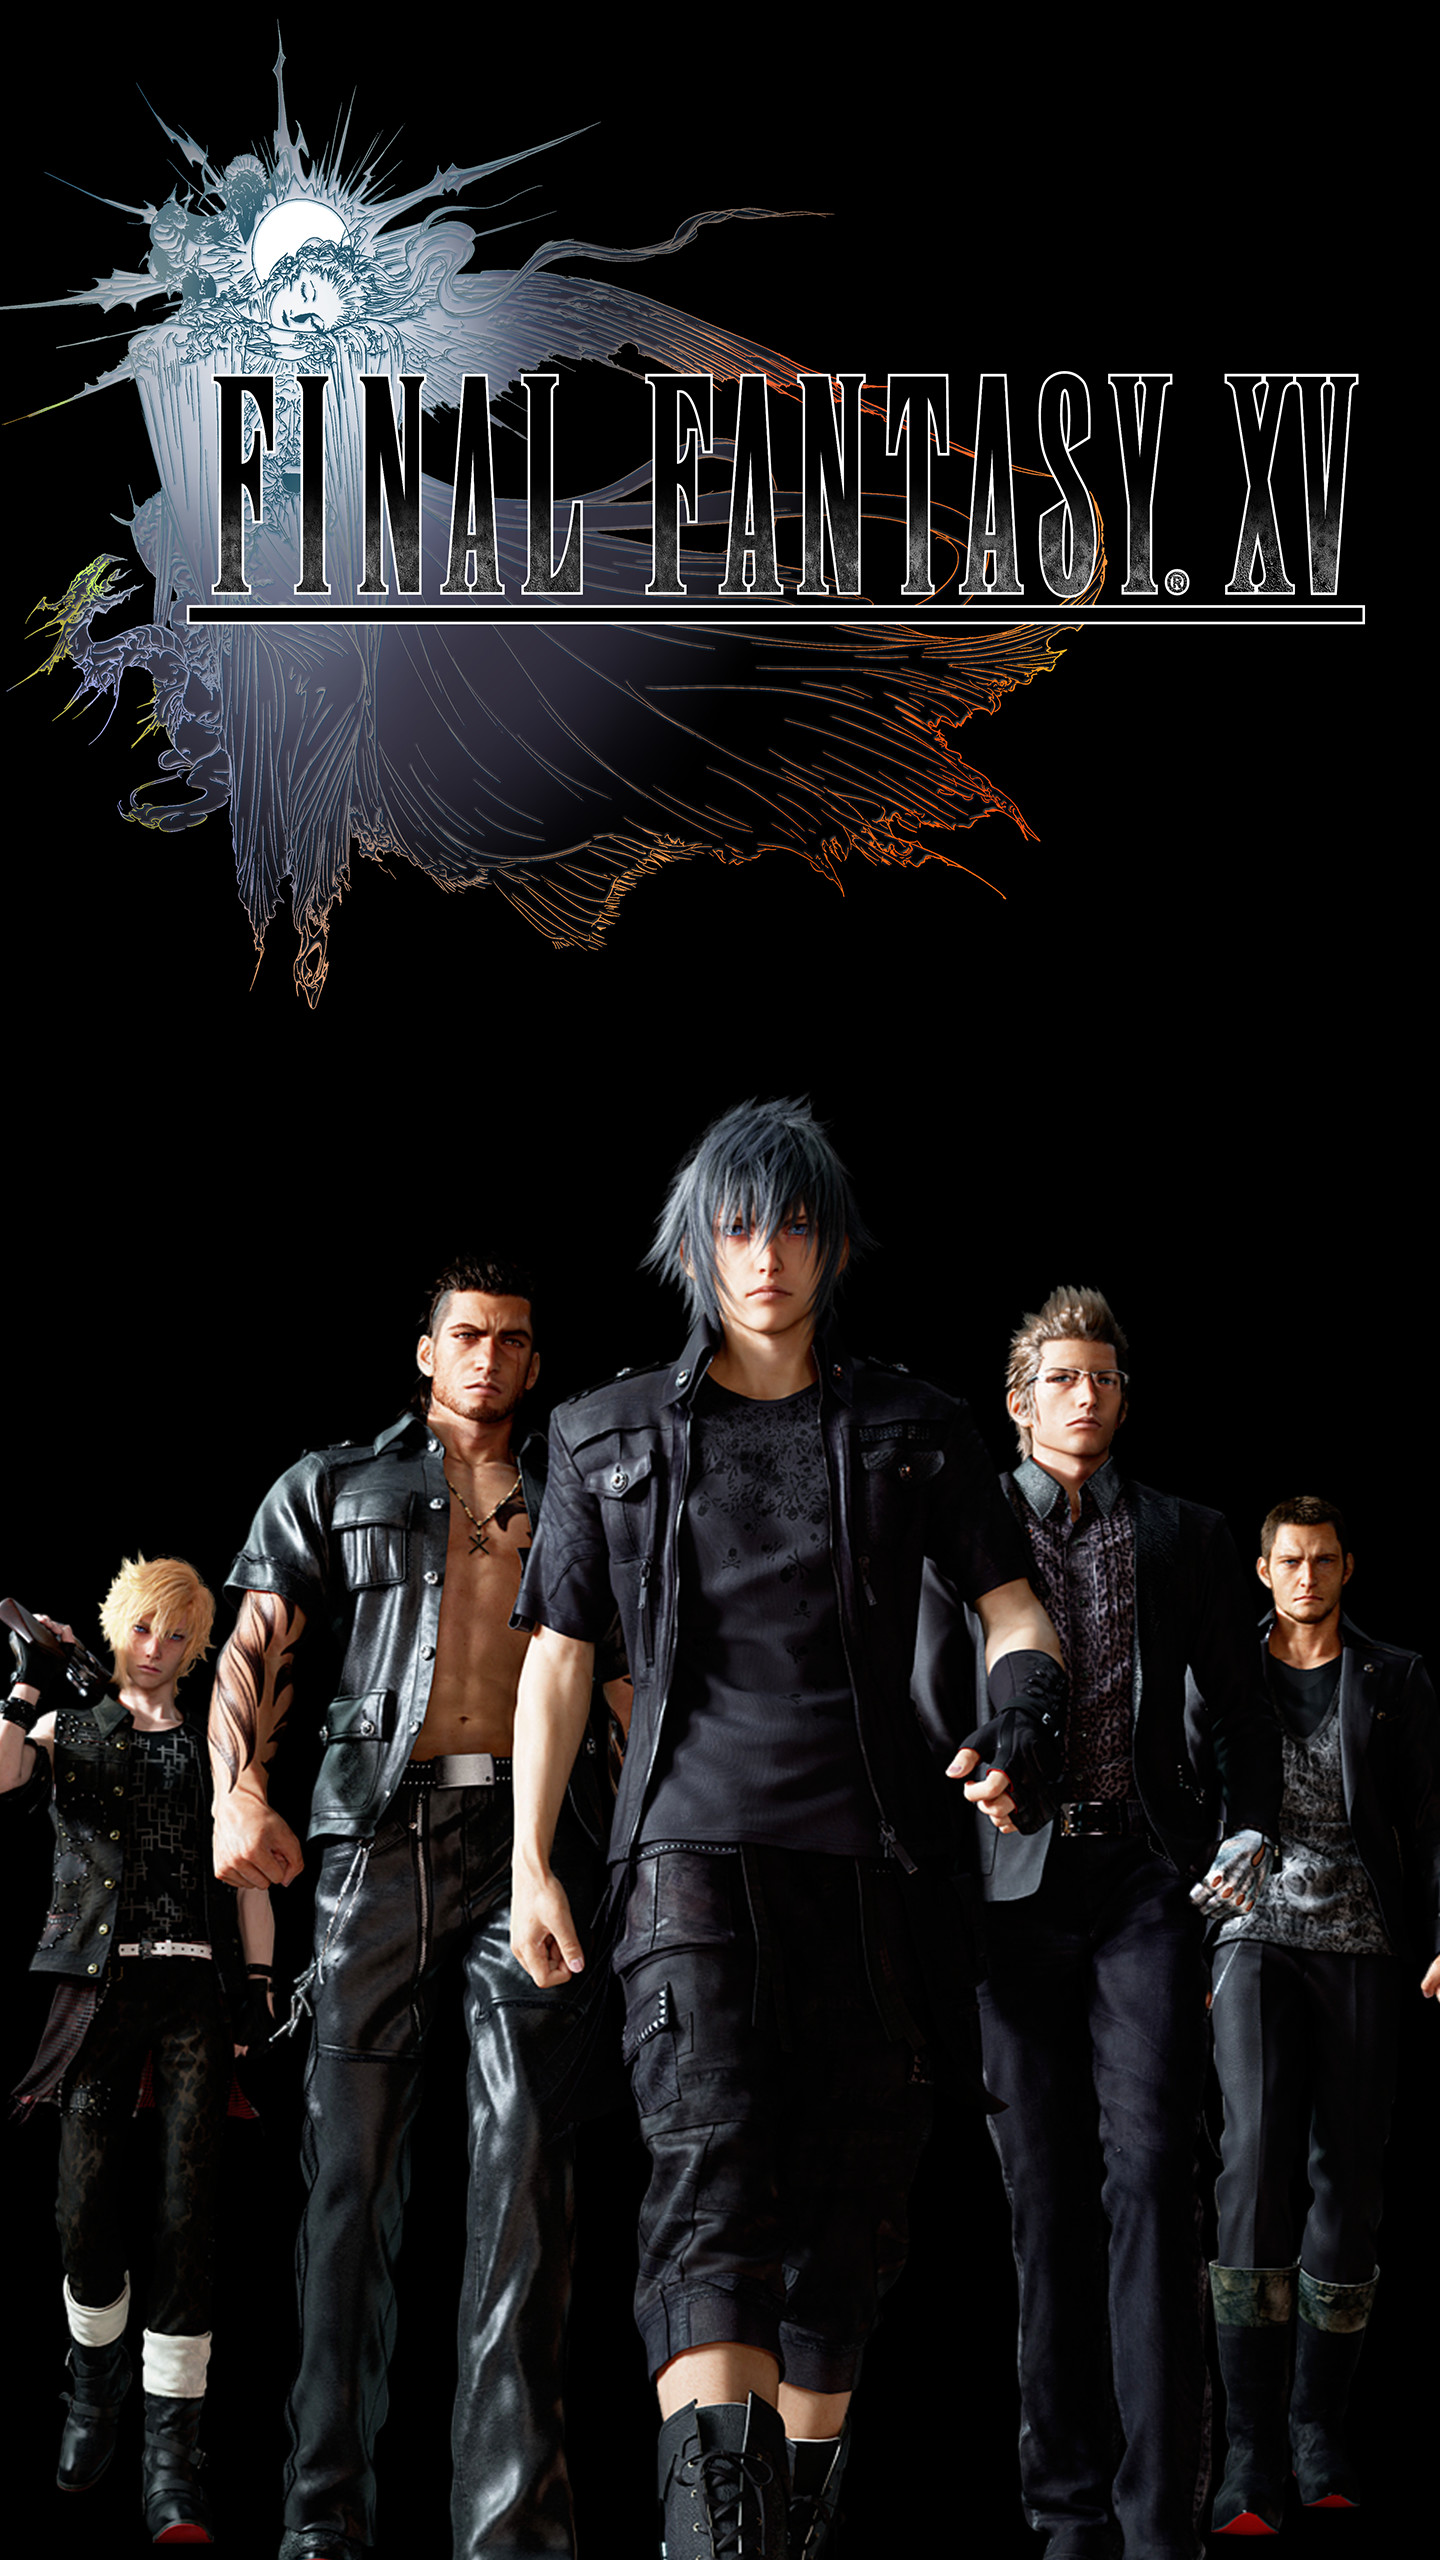 Wanted a FFXV wallpaper for my S7 but couldnt find one so I made this simplistic one and I thought Id share just in case anyone else wants to use it as